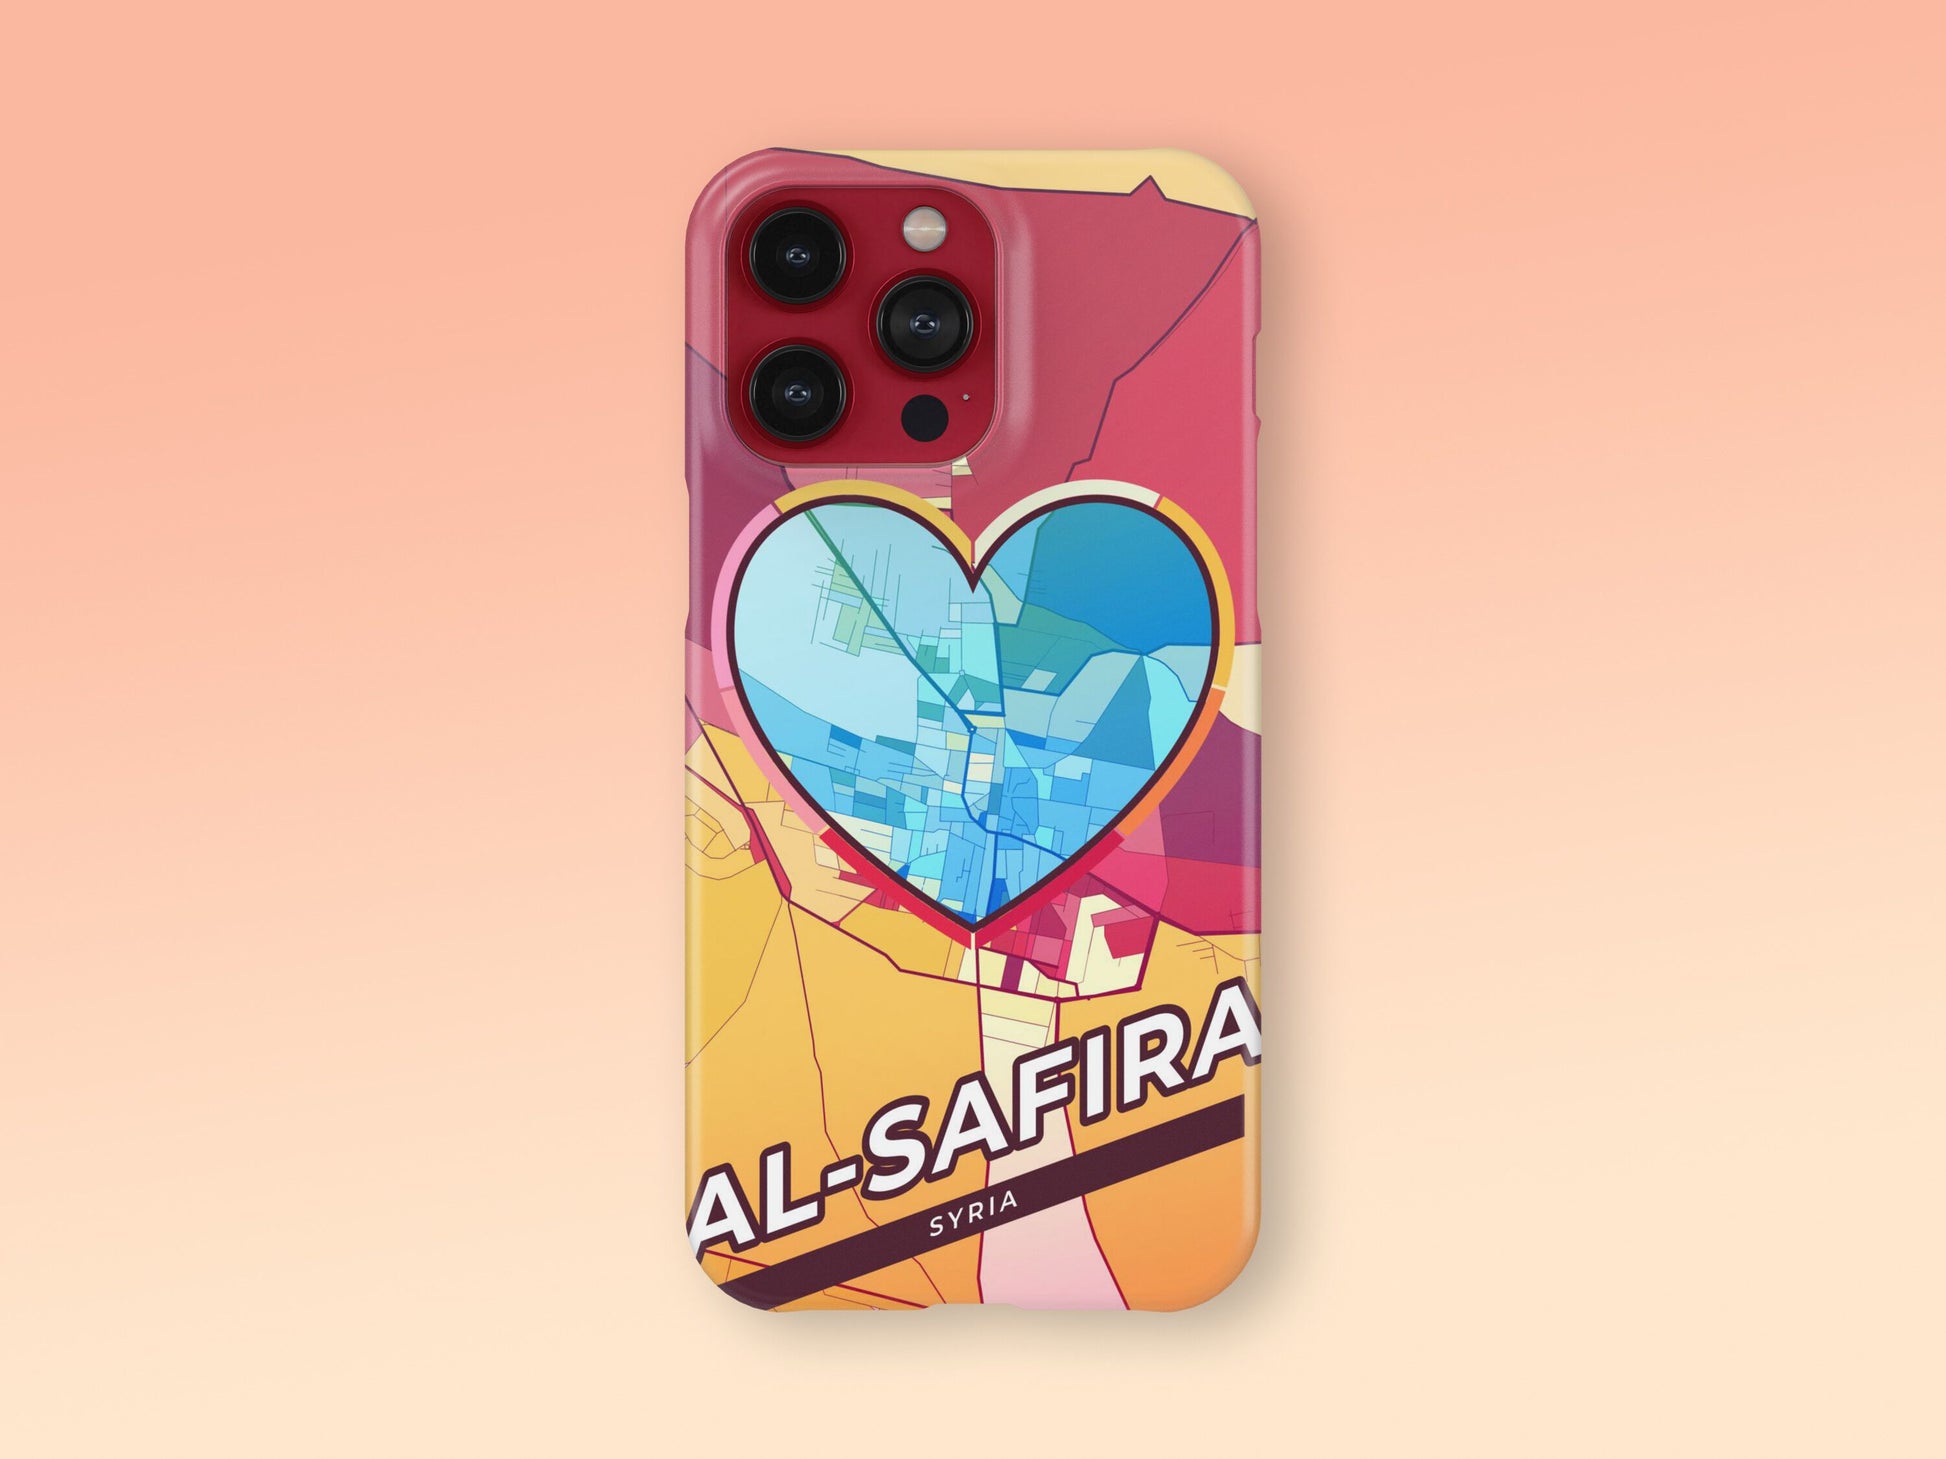 Al-Safira Syria slim phone case with colorful icon. Birthday, wedding or housewarming gift. Couple match cases. 2